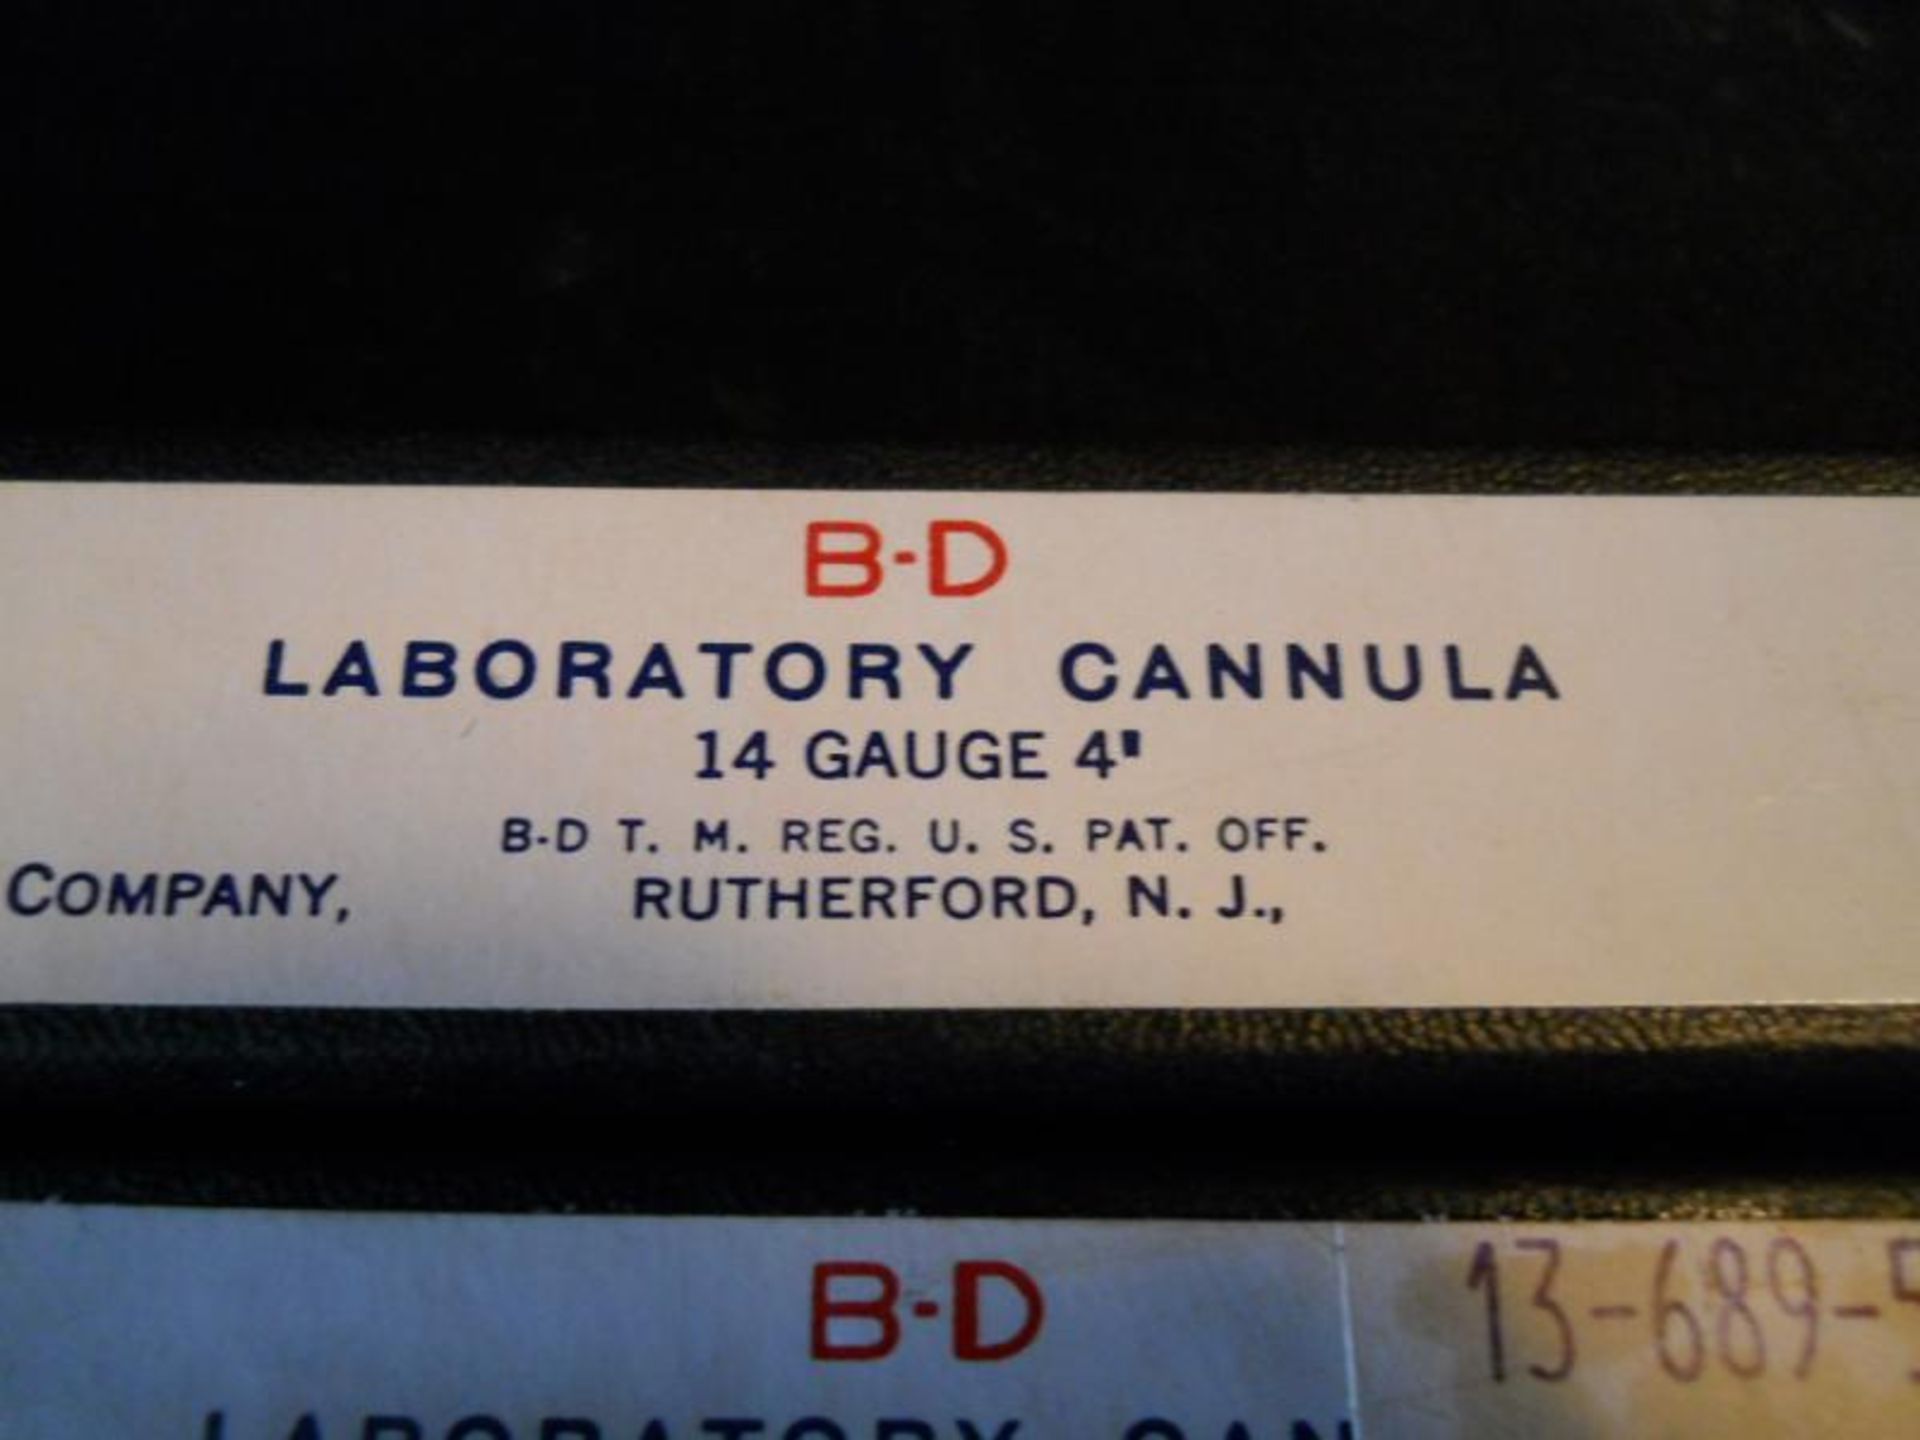 Lot of 2 Becton Dickinson B-D BD 14 Gauge 4" Laboratory Cannula 1789 1250NR, Qty 1, 331030762779 - Image 2 of 5